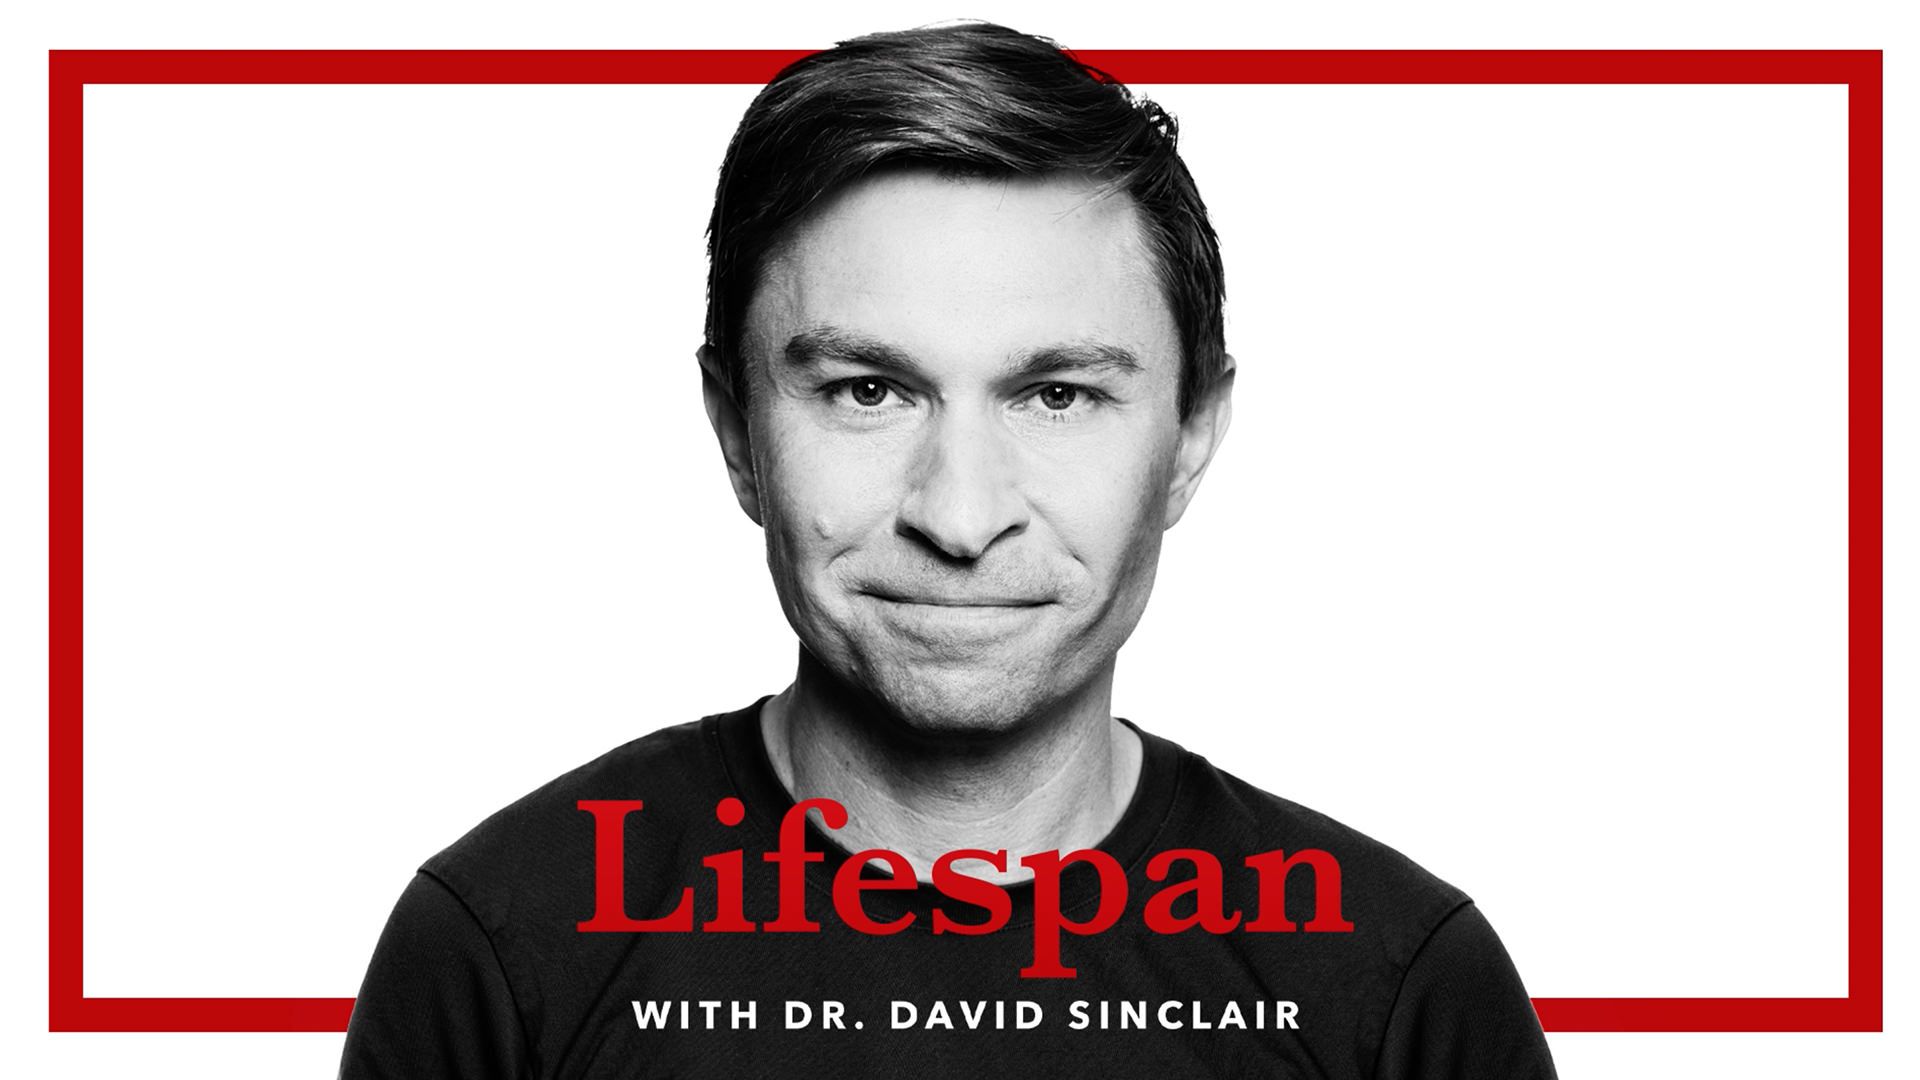 Welcome to Lifespan with Dr. David Sinclair